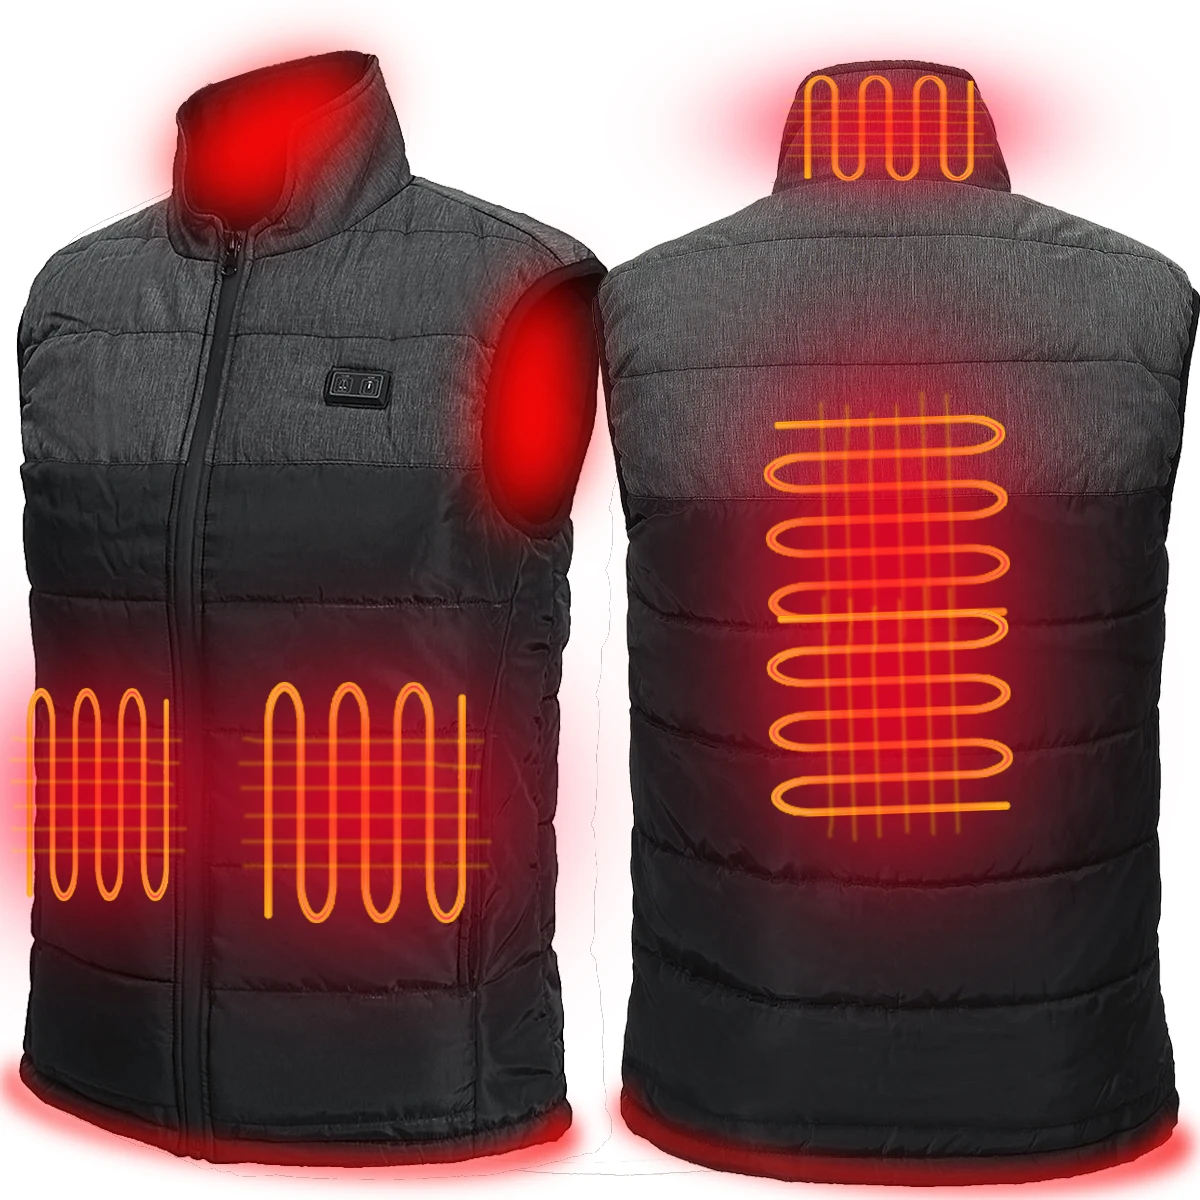 

USB 5V Battery Powered Heated Waistcoat for Cold Winter Fever Vest with Dual Zone Controller Soft Fleece Lining